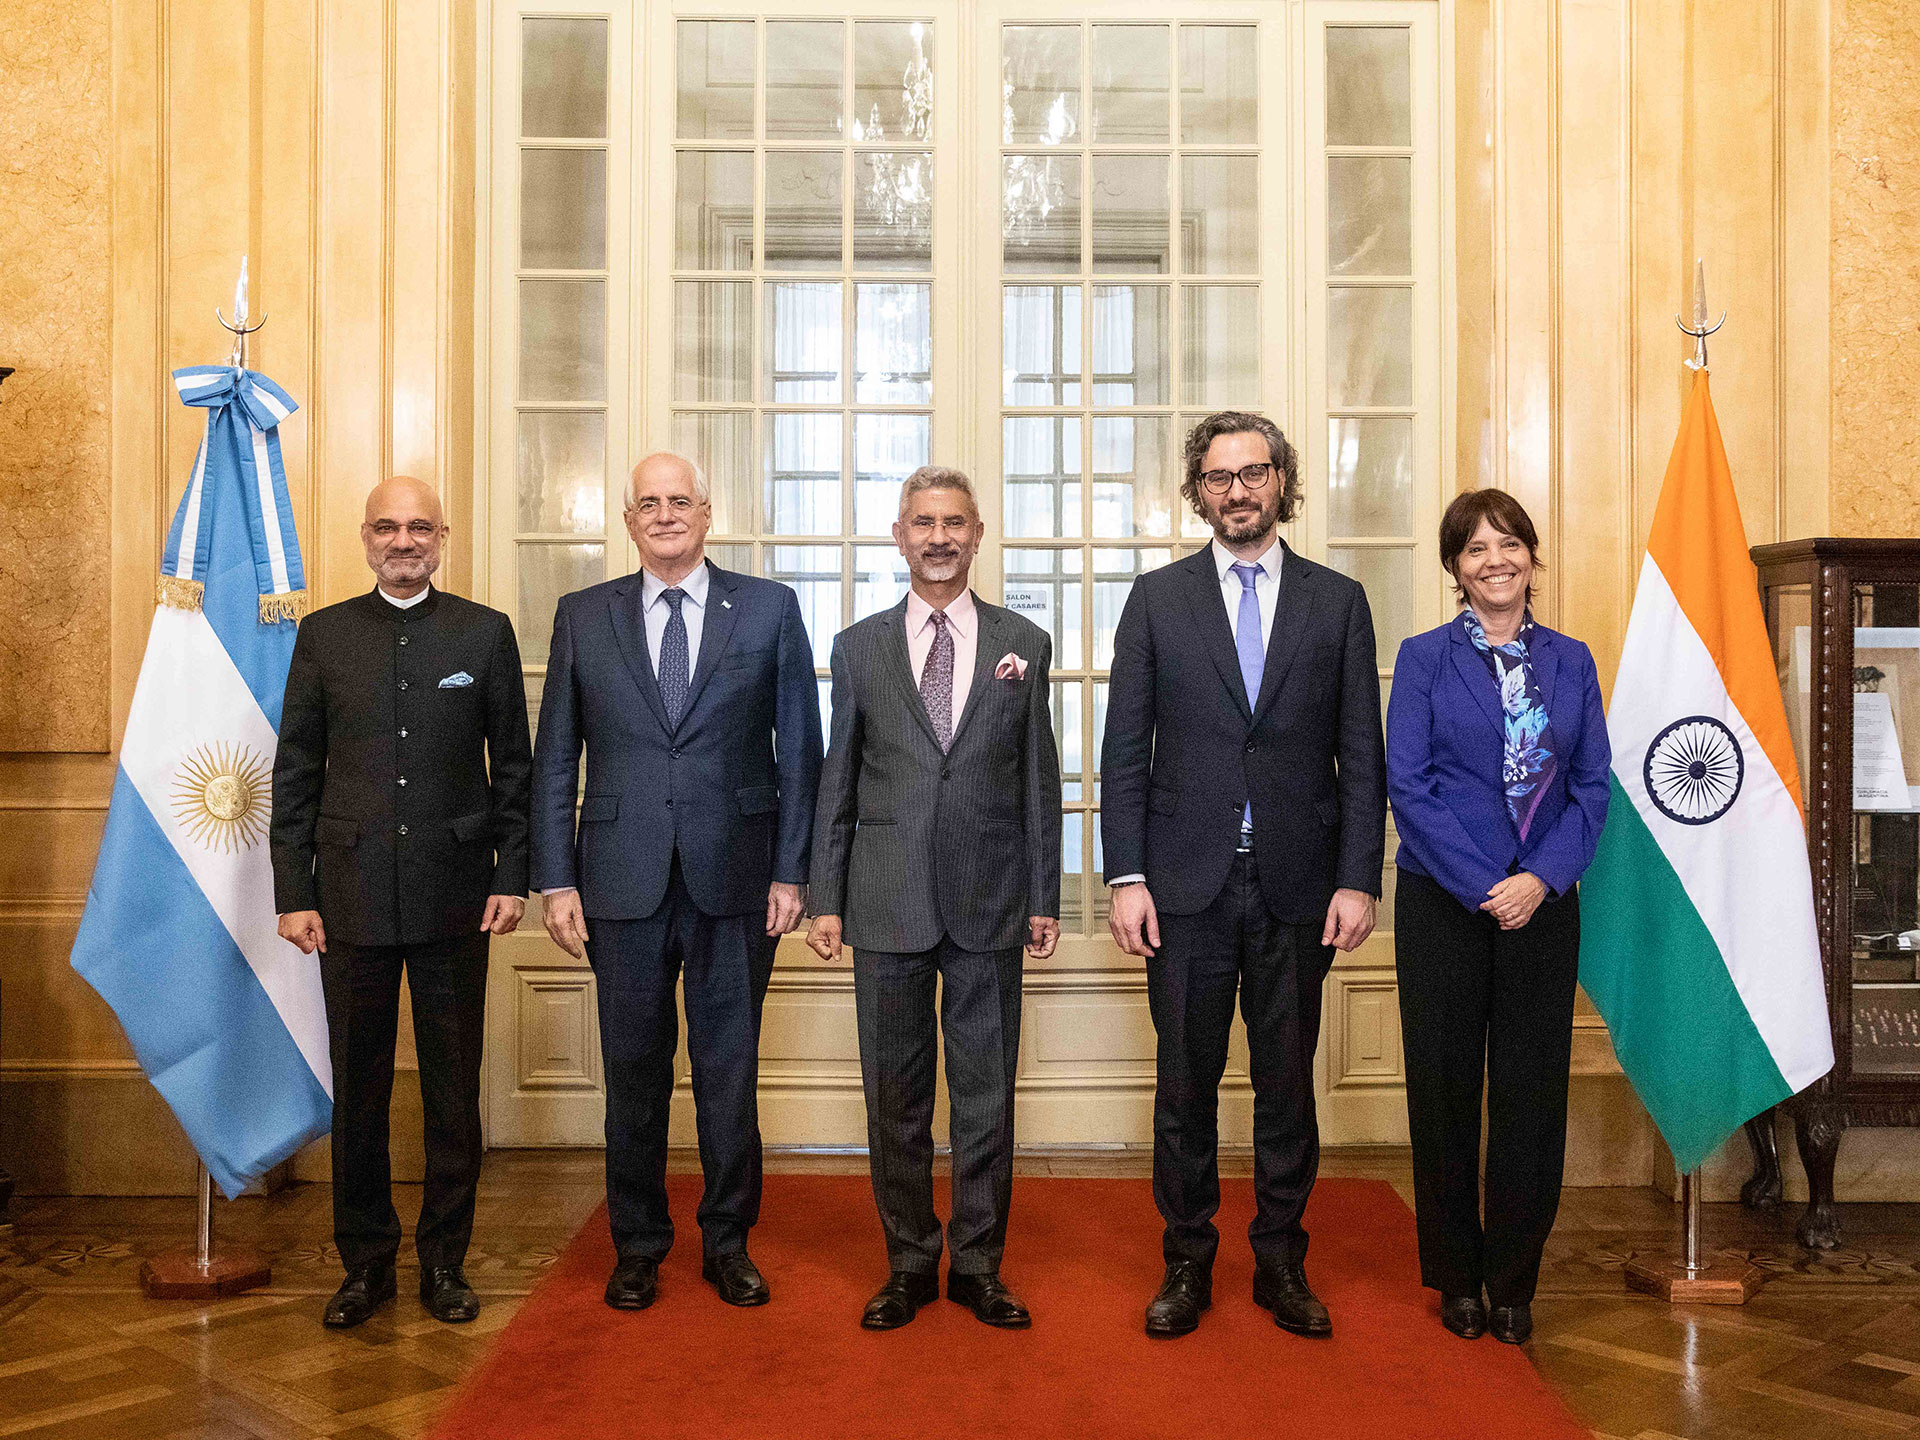 From left to right, Ambassador Badia, Argentine Defense Minister Jorge Taiana, Indian Foreign Minister Subramanian, Santiago Cafiro and Strategic Affairs Secretary Mercedes Marco del Pont